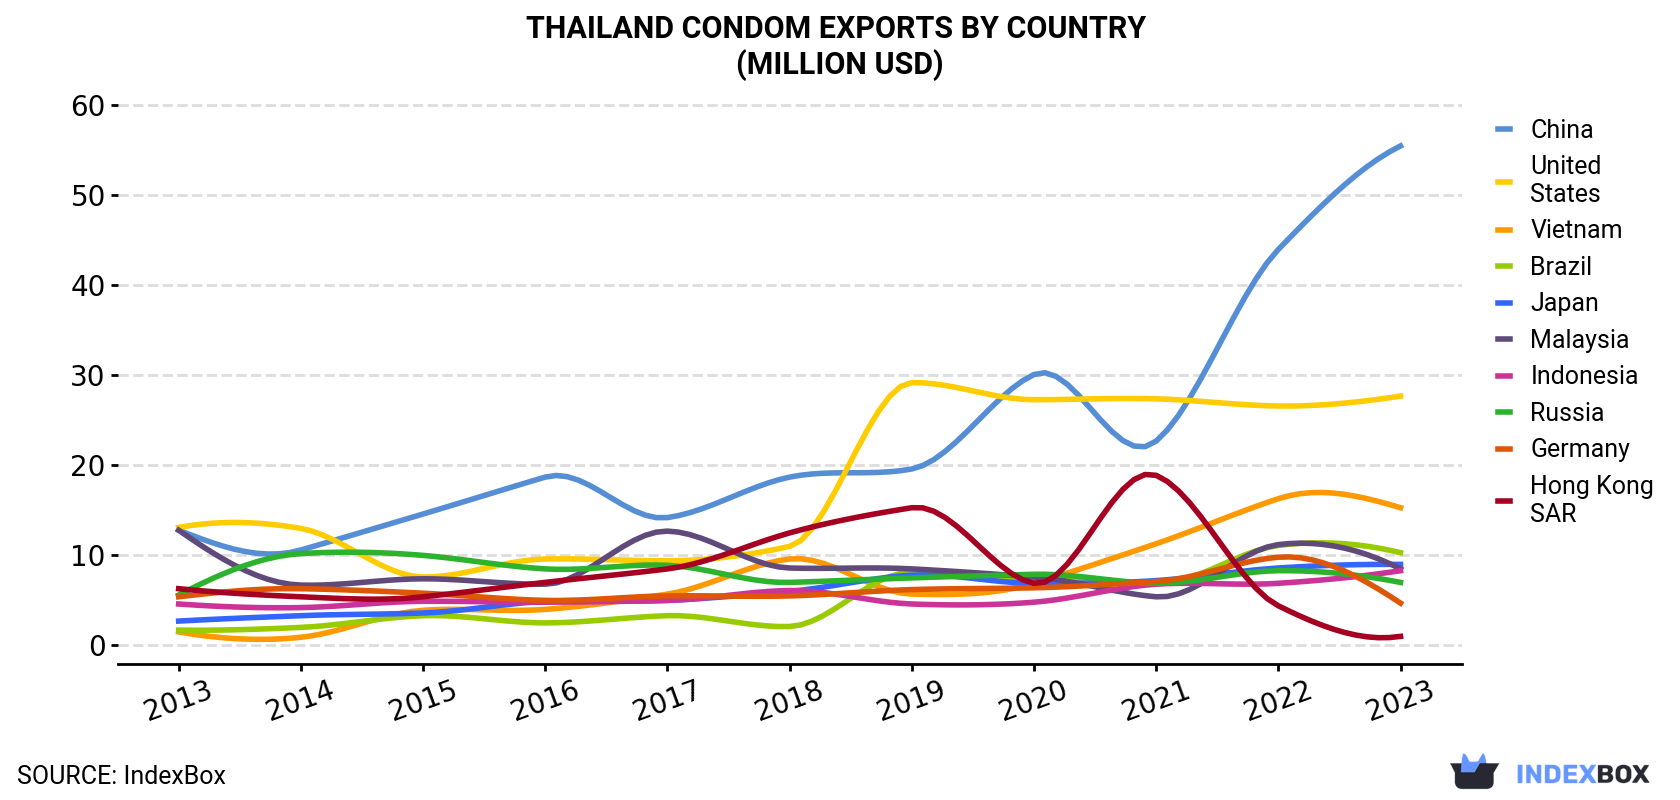 Thailand Condom Exports By Country (Million USD)